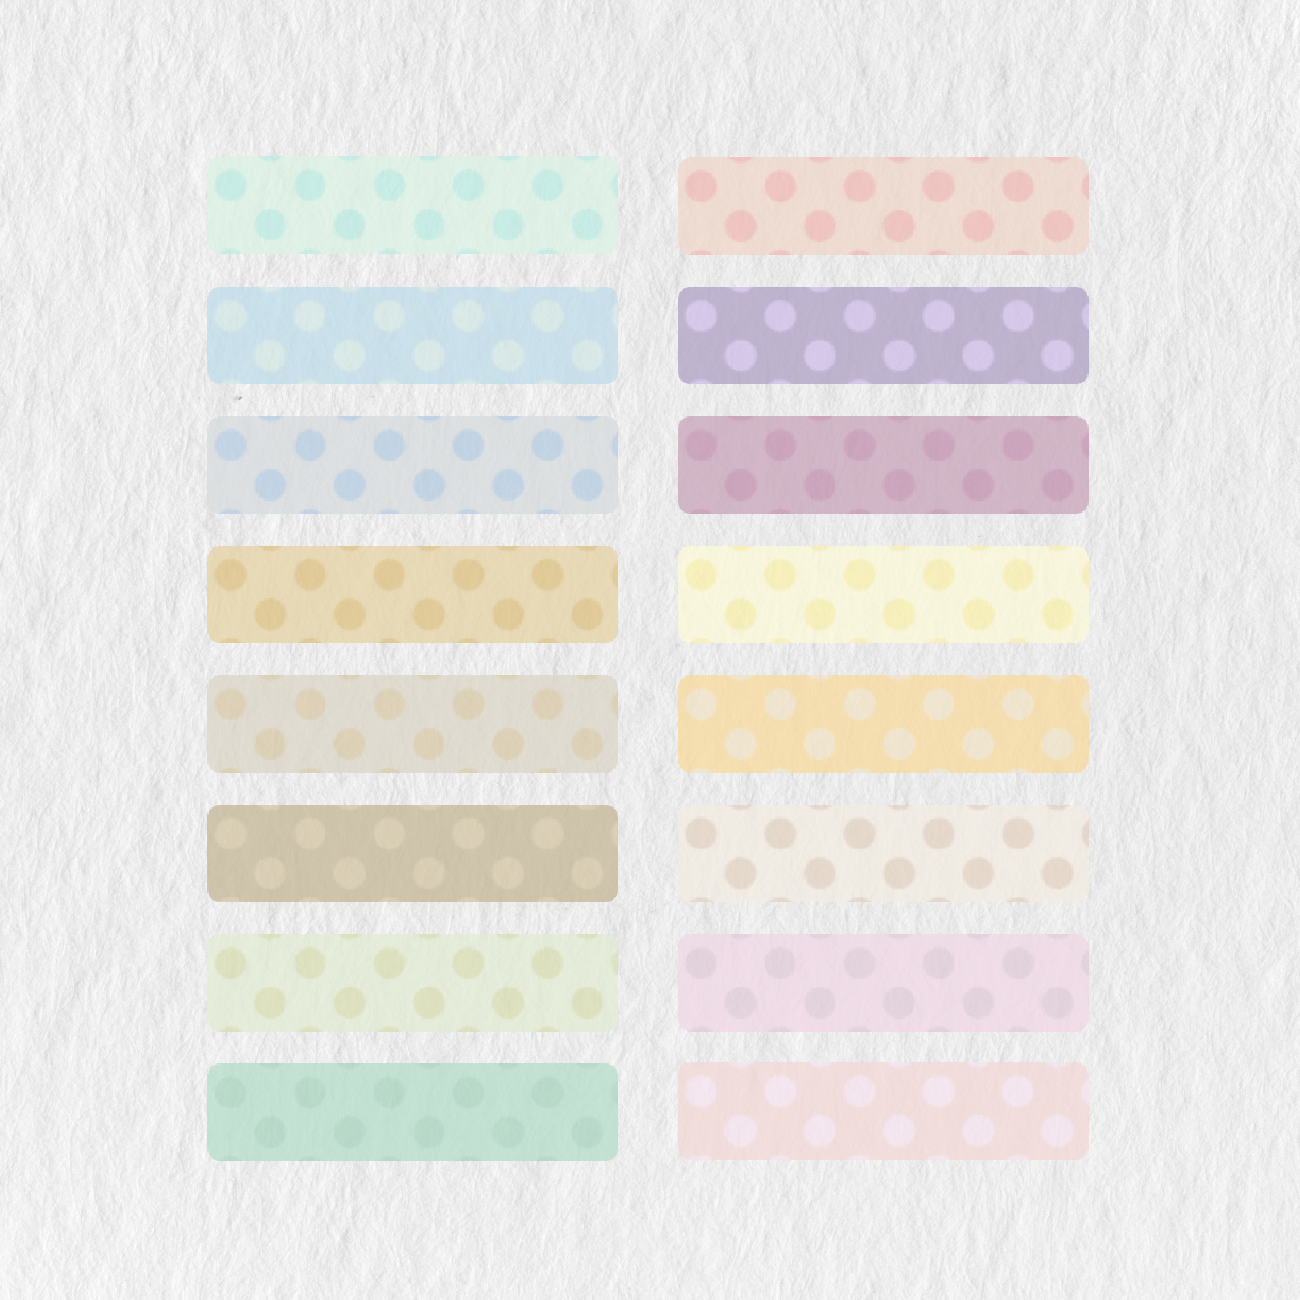 117 Digital Journal Washi Tapes For Goodnotes Notability - Stationery Pal